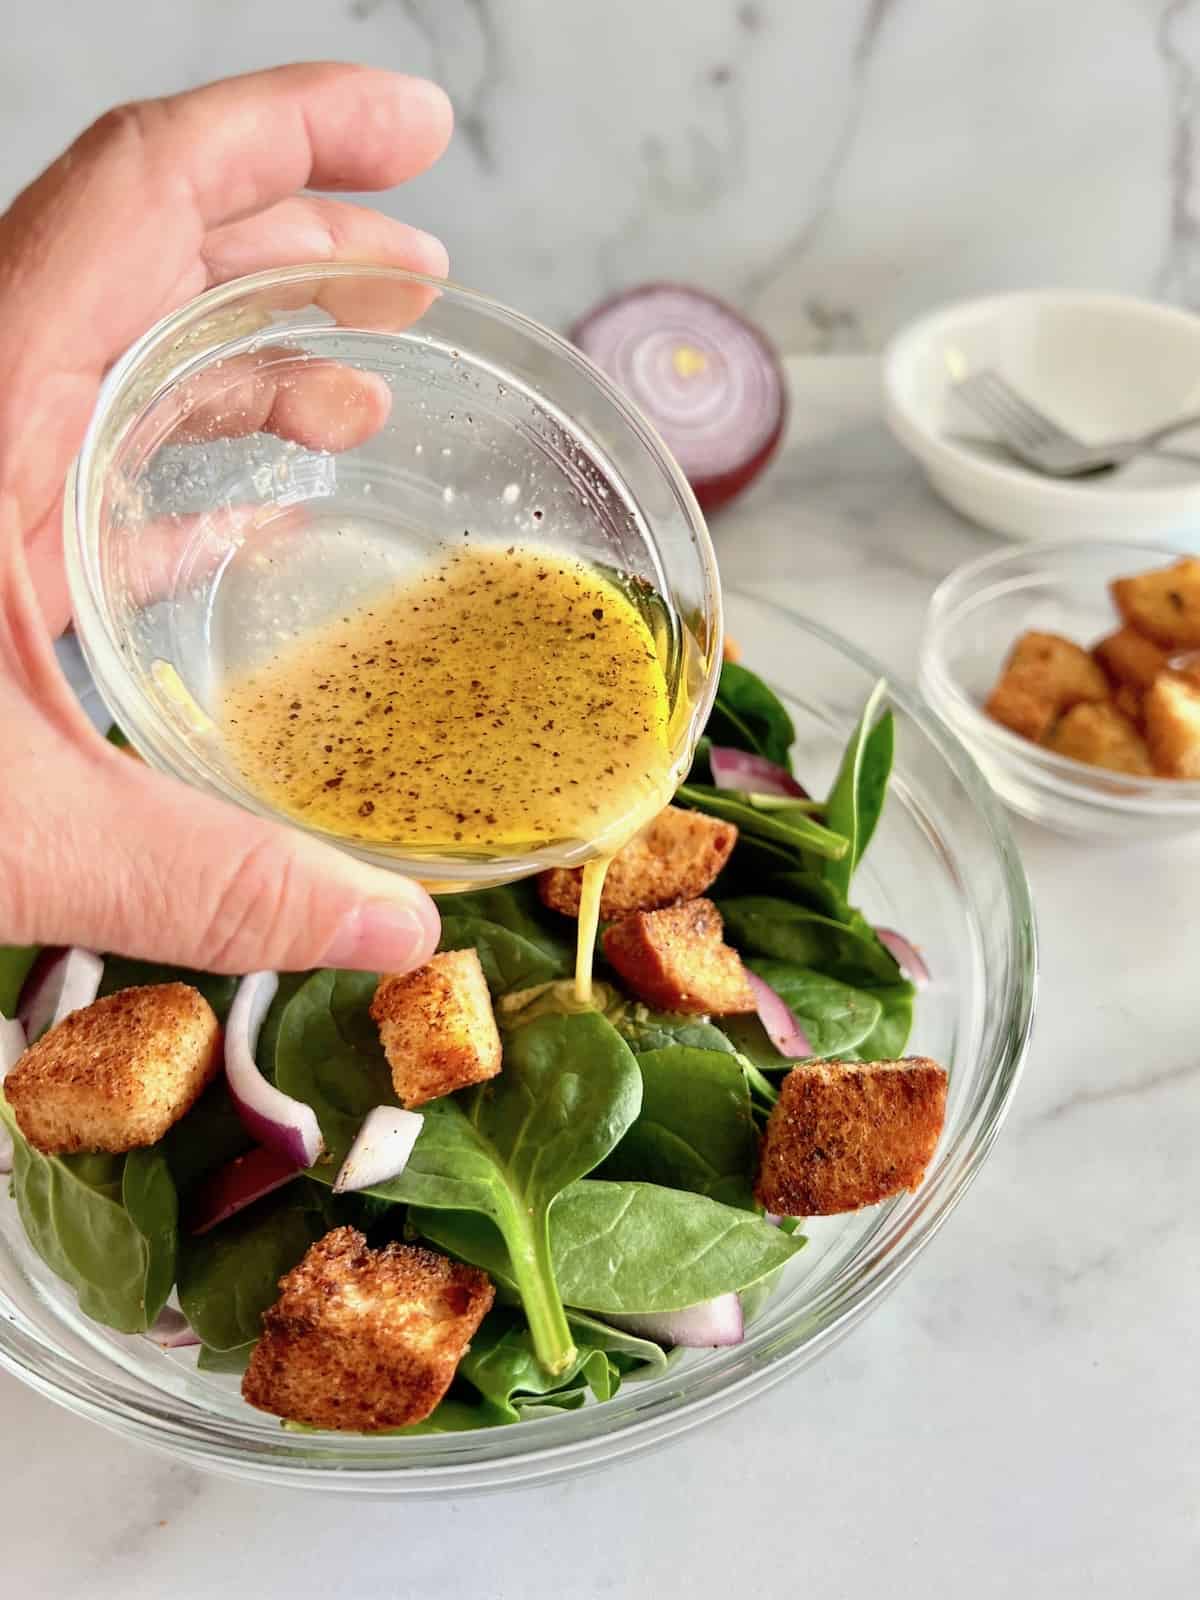 Pouring the dijon vinaigrette on the bowl of spinach salad.